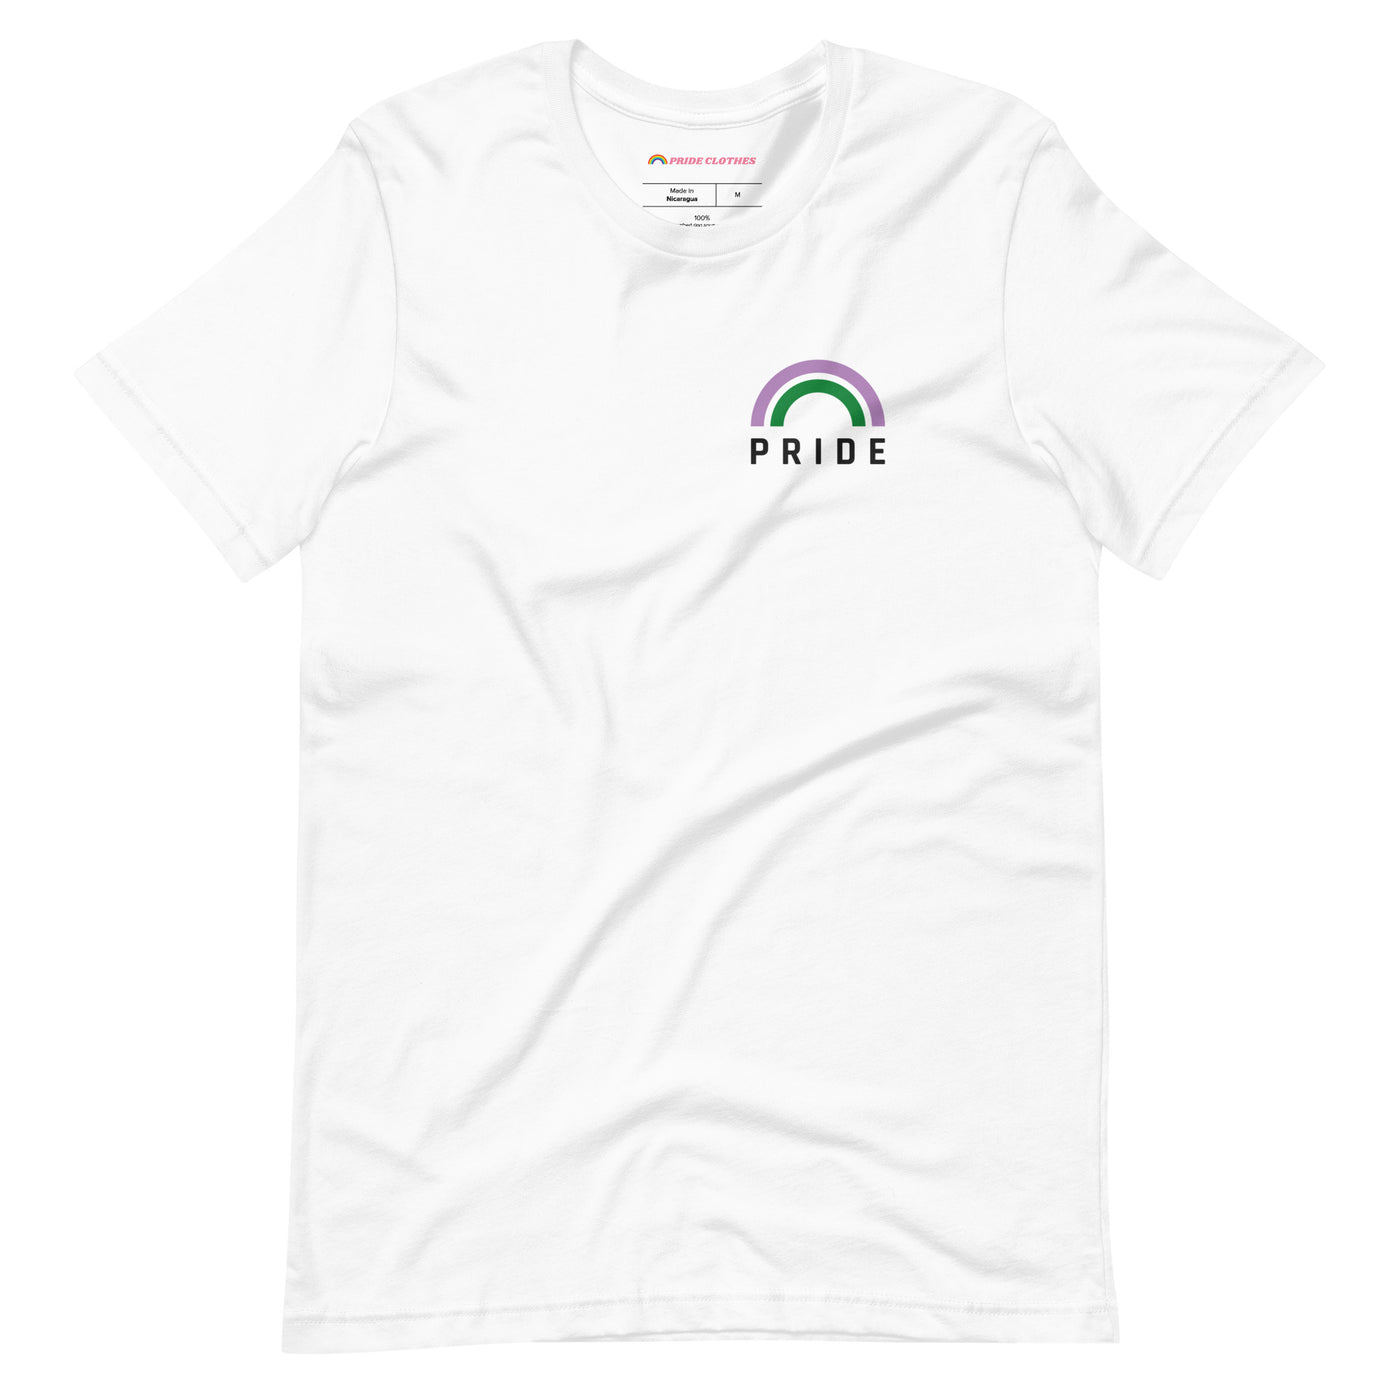 Pride Clothes - Nonbinary Genderqueer Rainbow Pride Shop T-Shirt - White